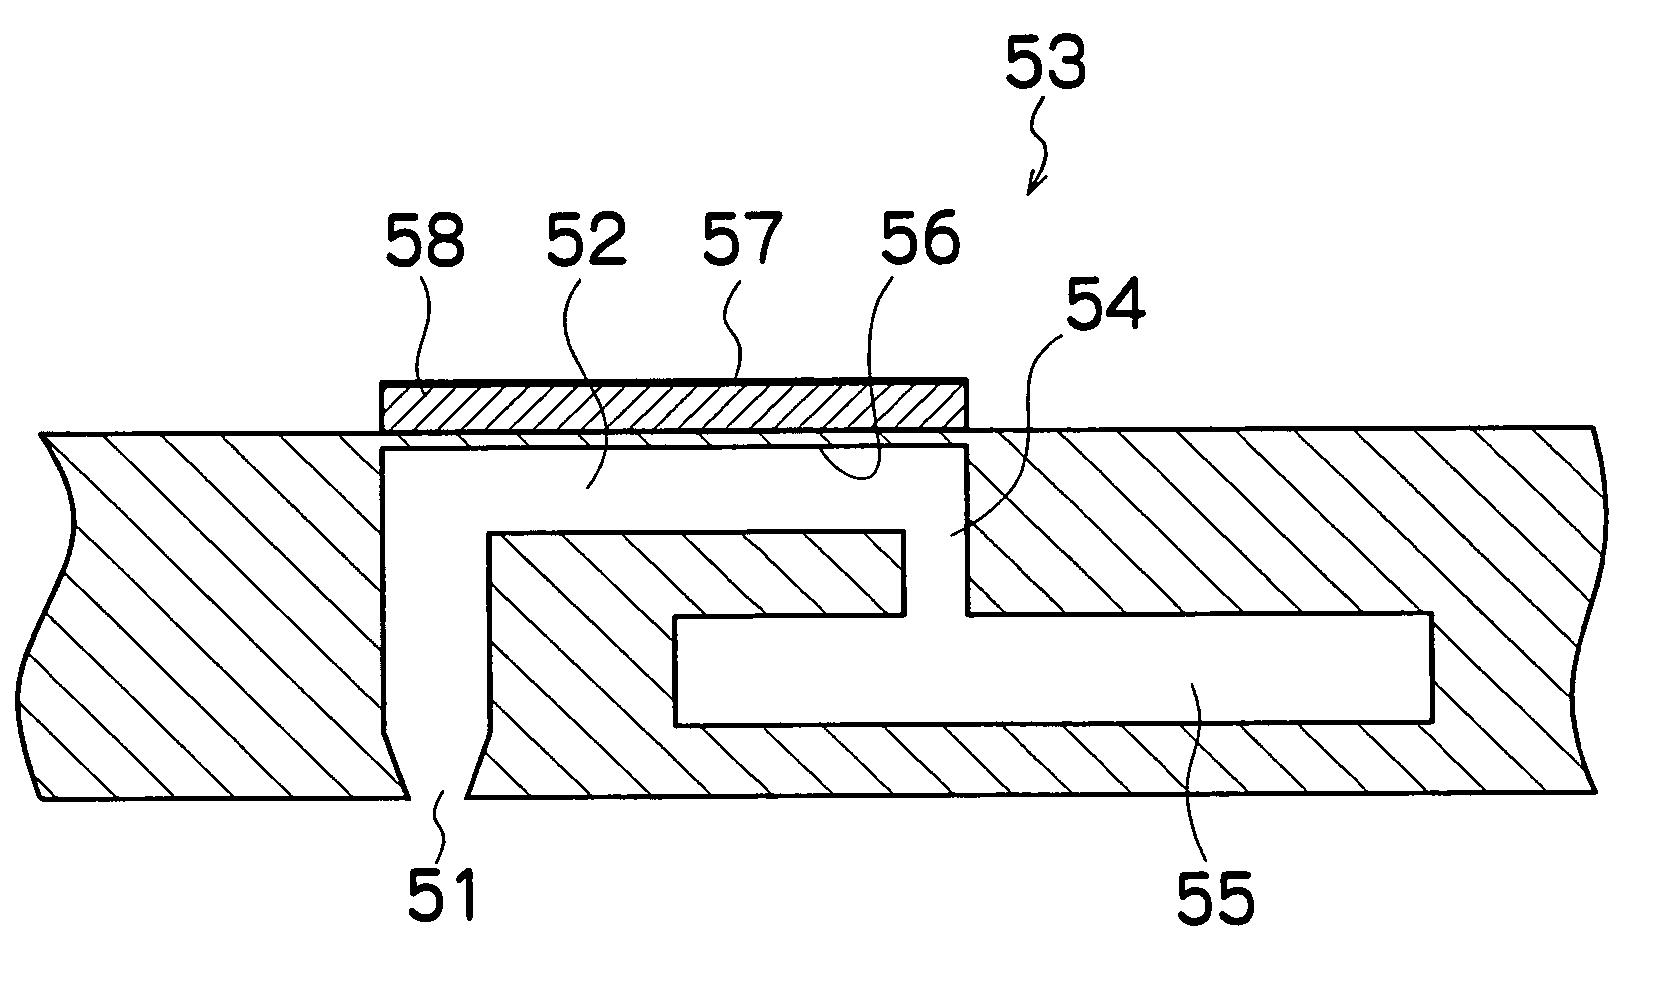 Liquid droplet ejection apparatus and image forming apparatus